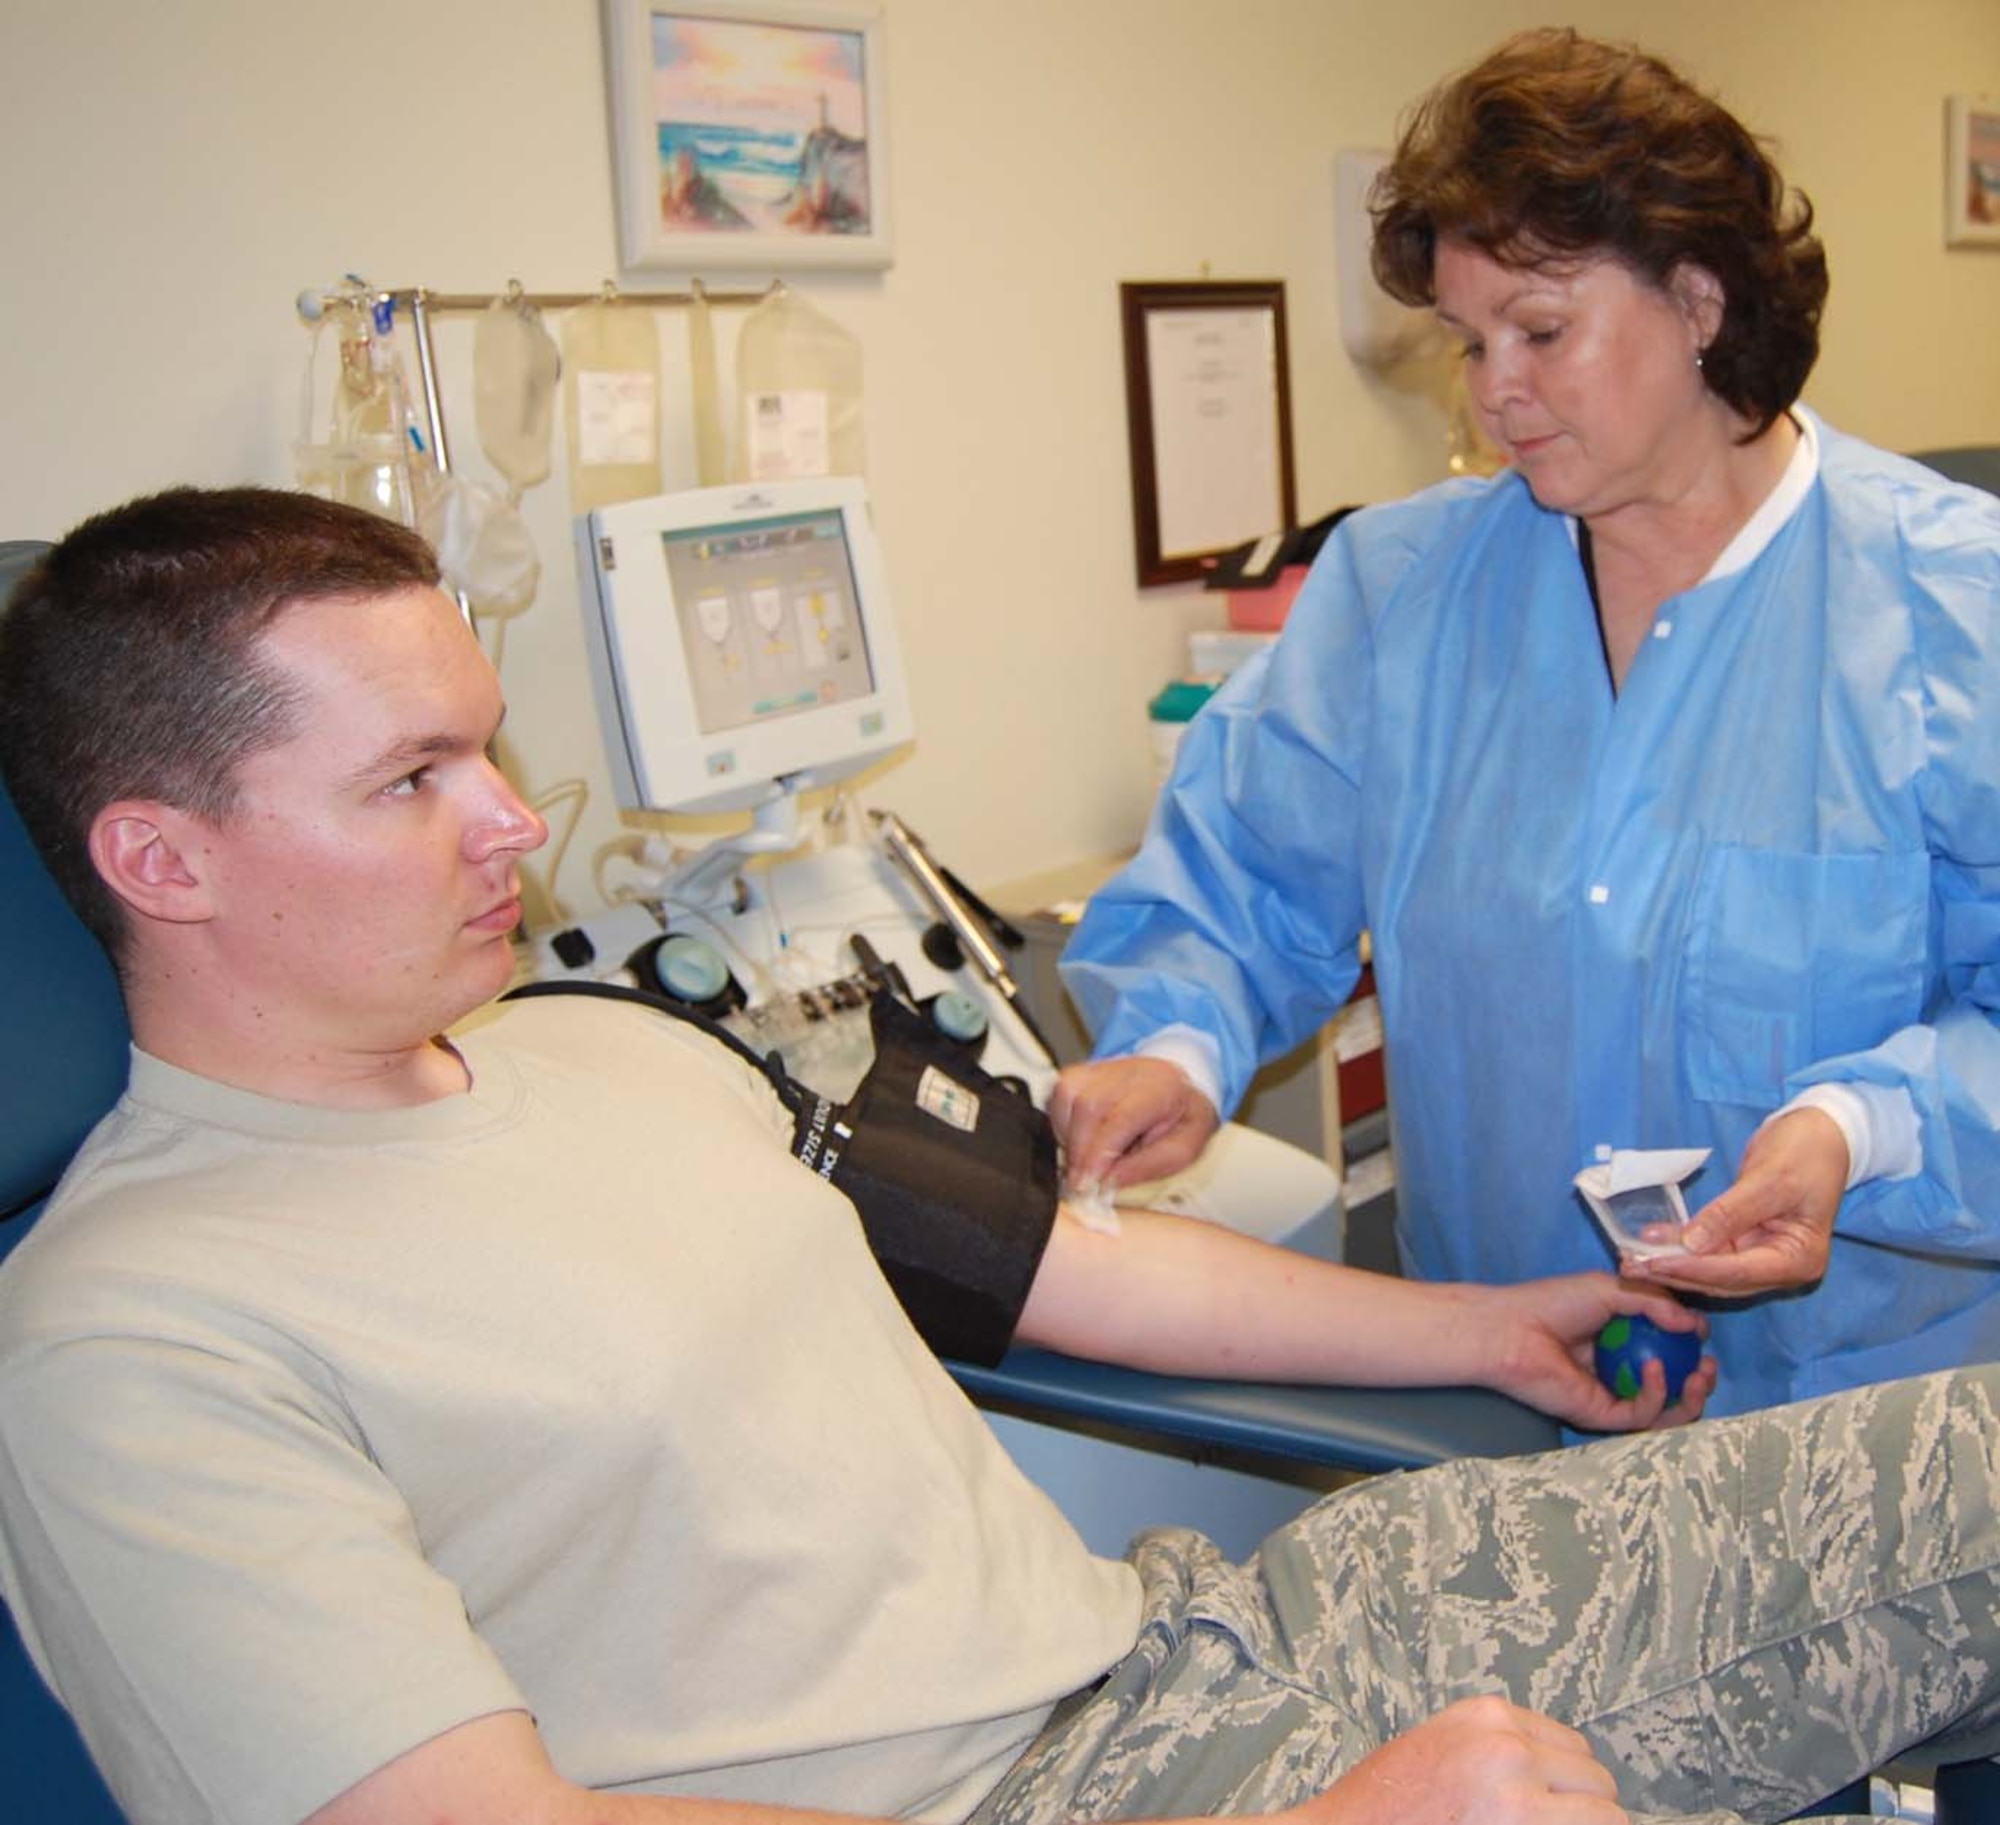 Rose Weatherly prepares Airman 1st Class Marthinus Taljaard, 81st Diagnostics and Therapeutics Squadron at Keesler Air Force Base, Miss., for platelet donation. This was the second time he had participated in the apheresis process. (U.S. Air Force photo/Steve Pivnick) 